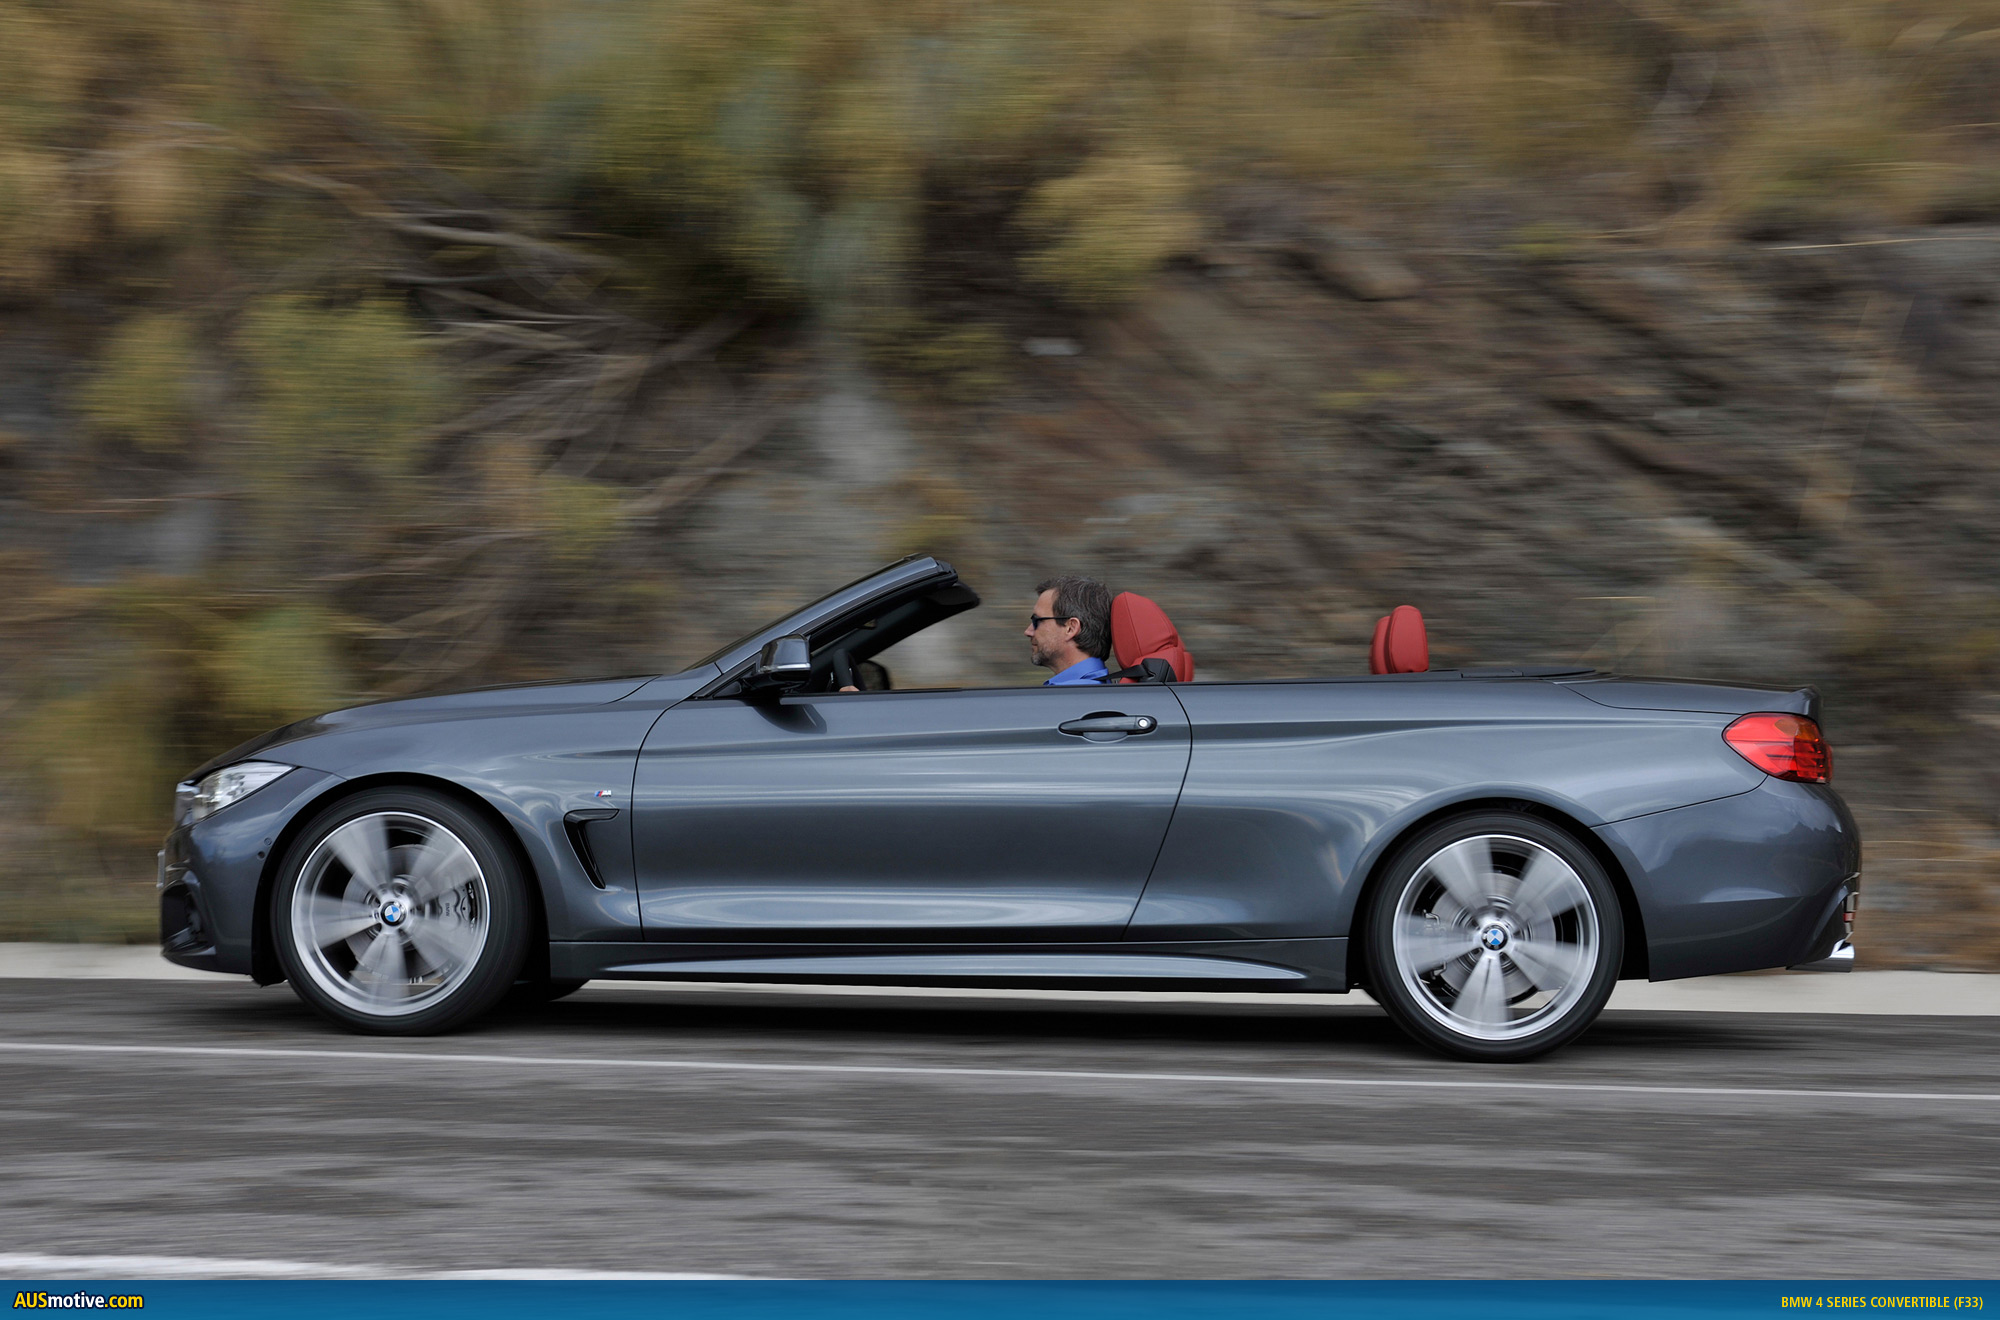 2000x1320 > BMW 4 Series Convertible Wallpapers